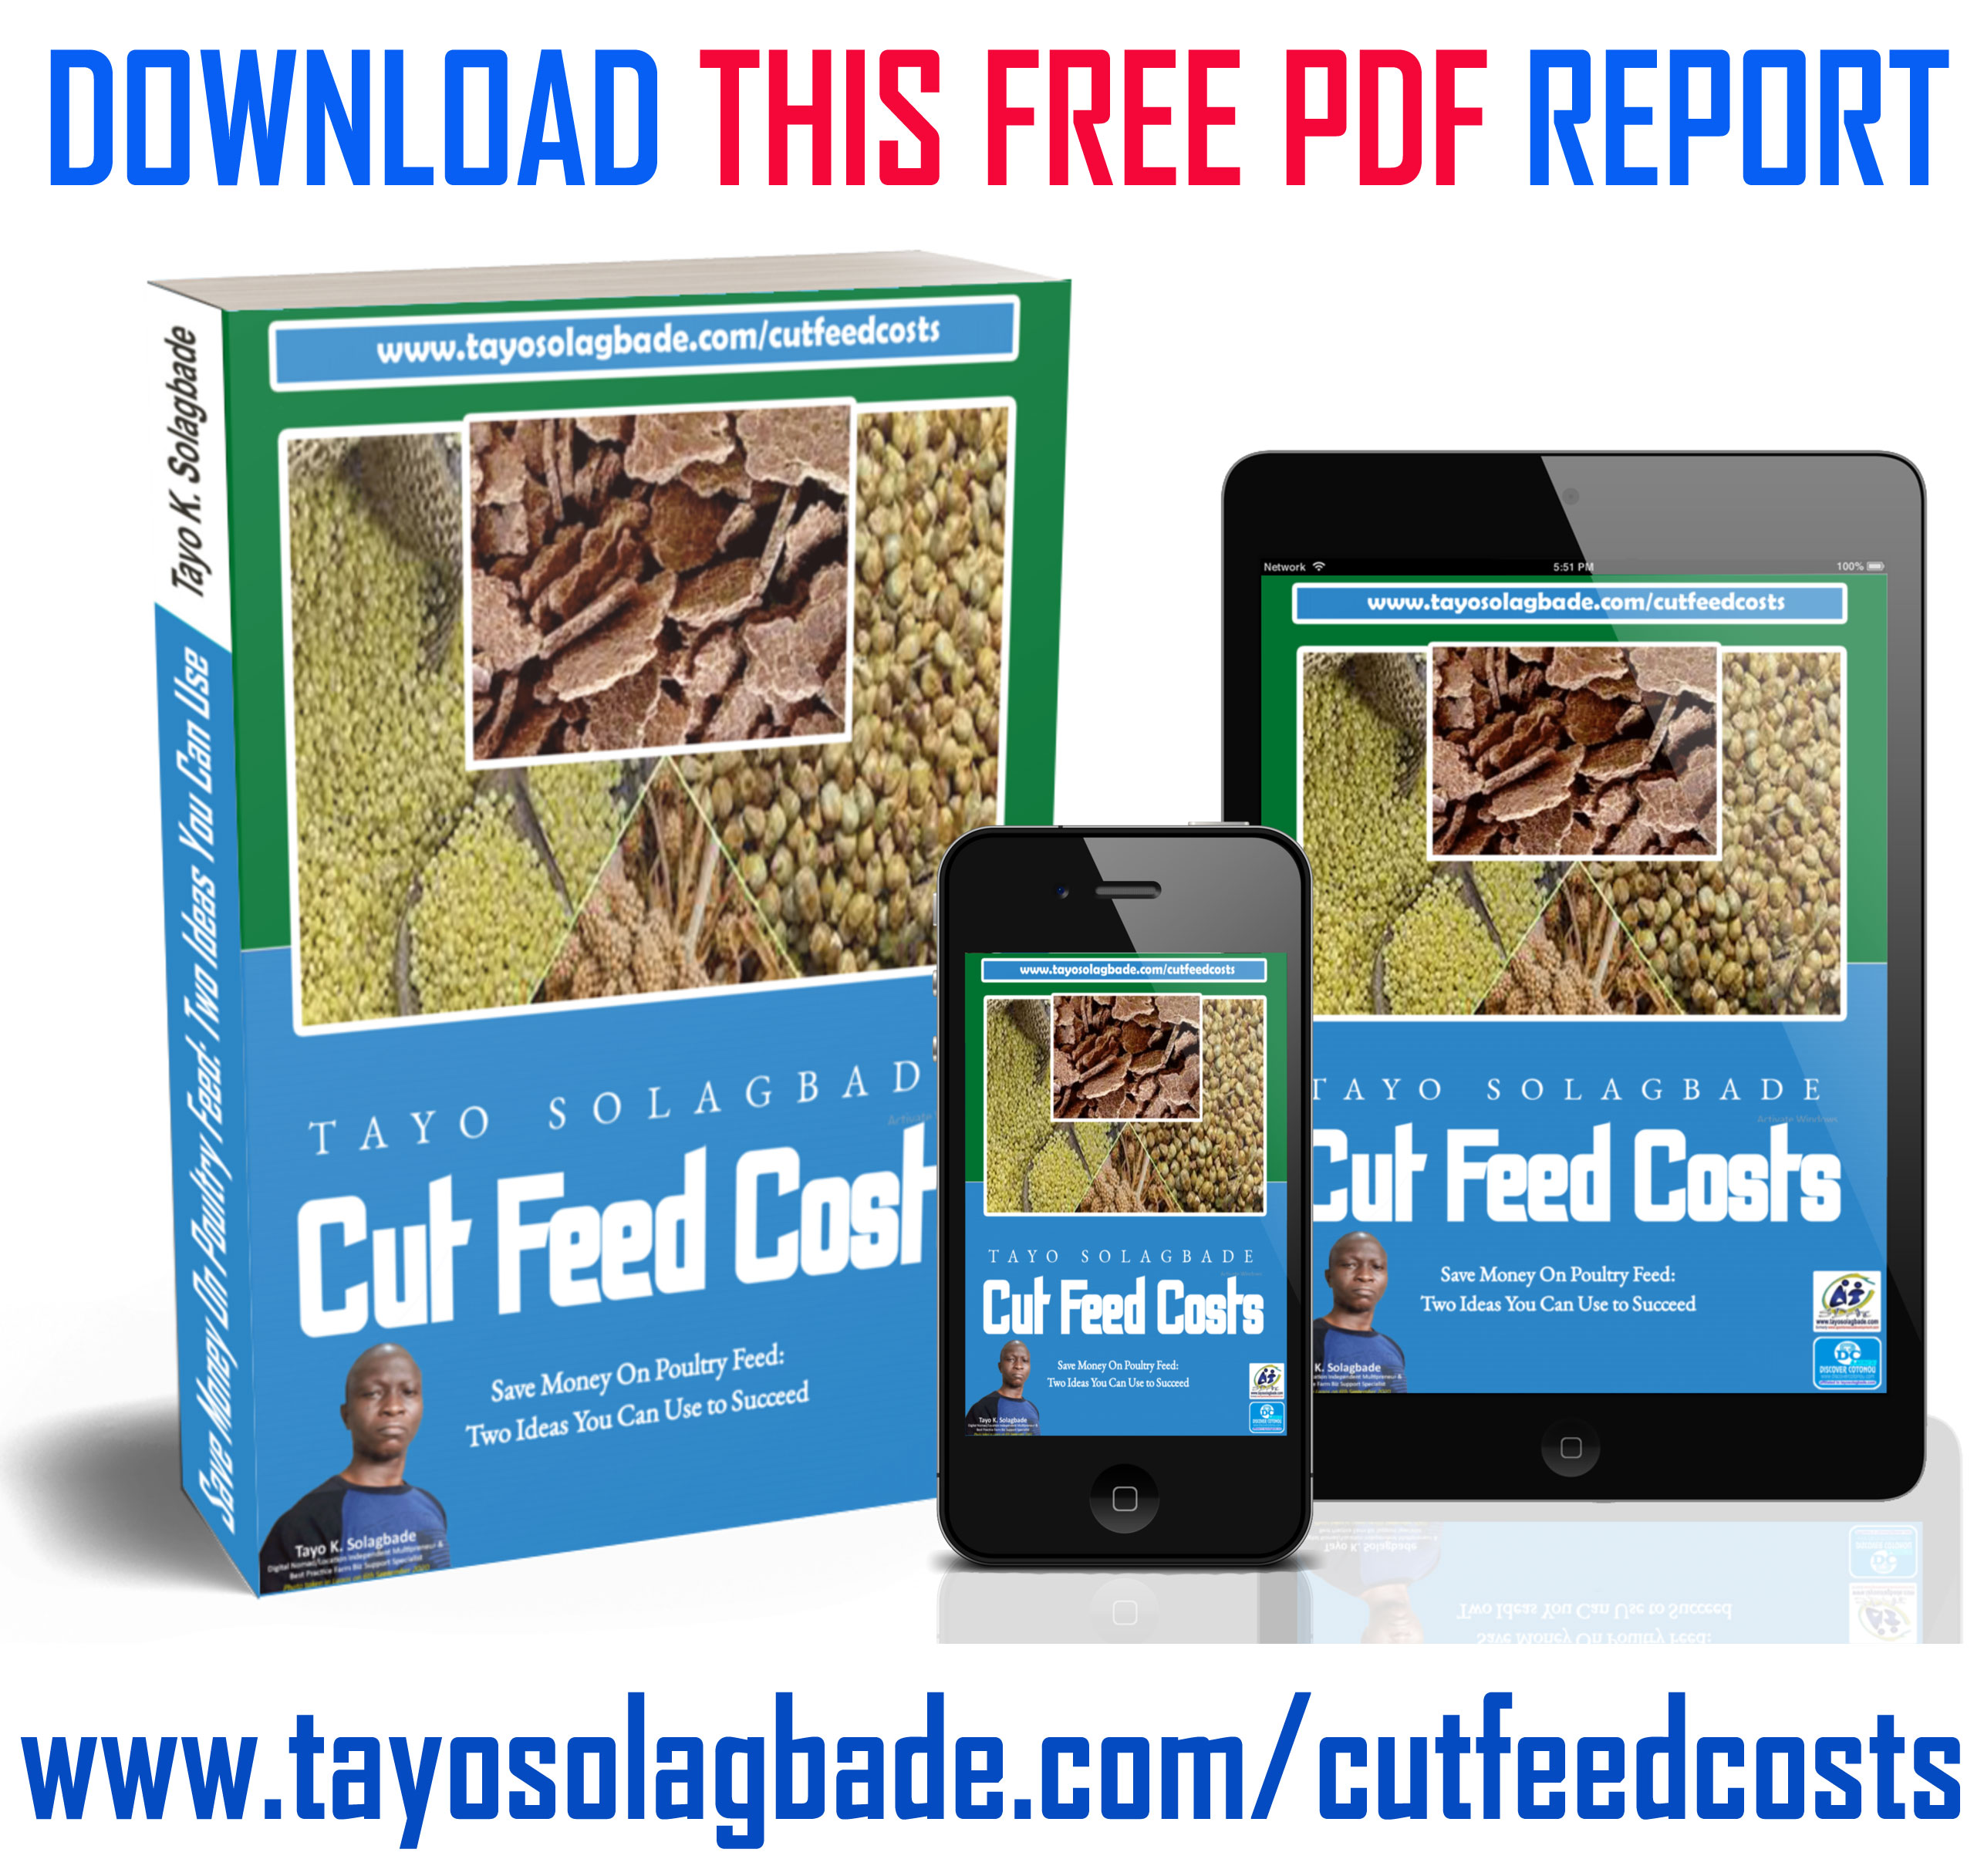 [PDF] Save Money On Poultry Feed: Two Ideas You Can Use to Succeed